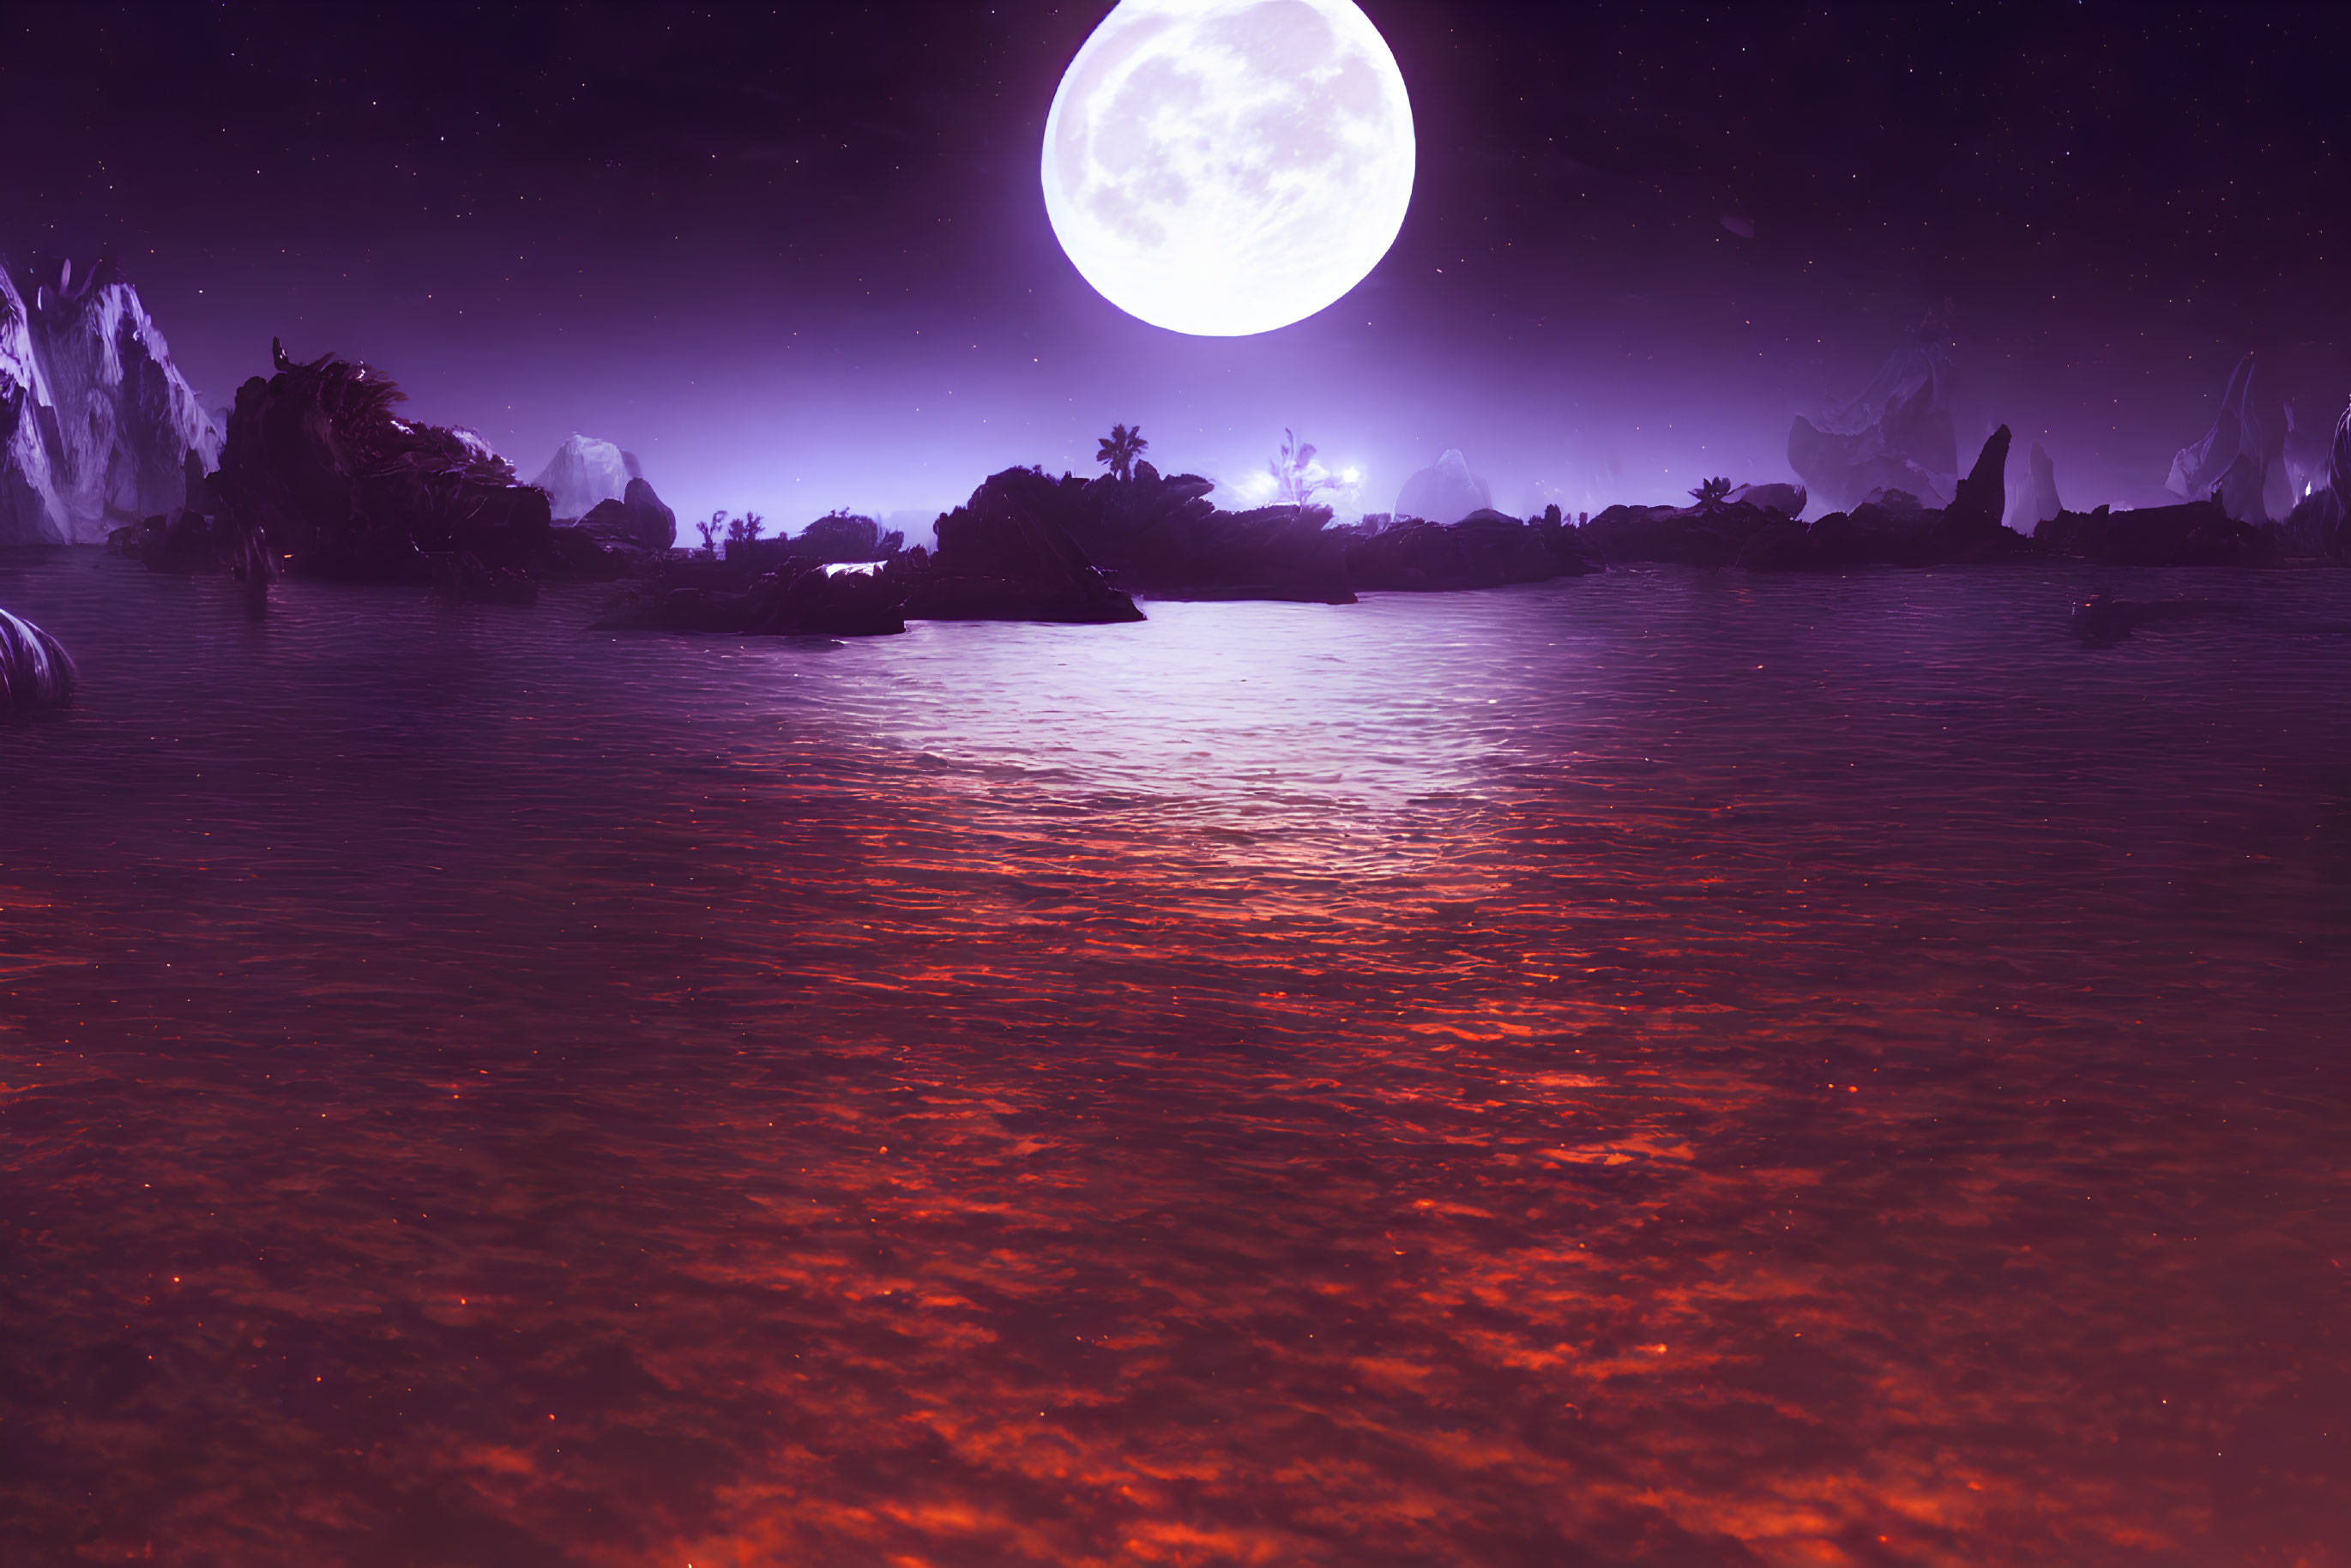 Alien landscape with large moon, red ocean, silhouetted rocks, and starry sky